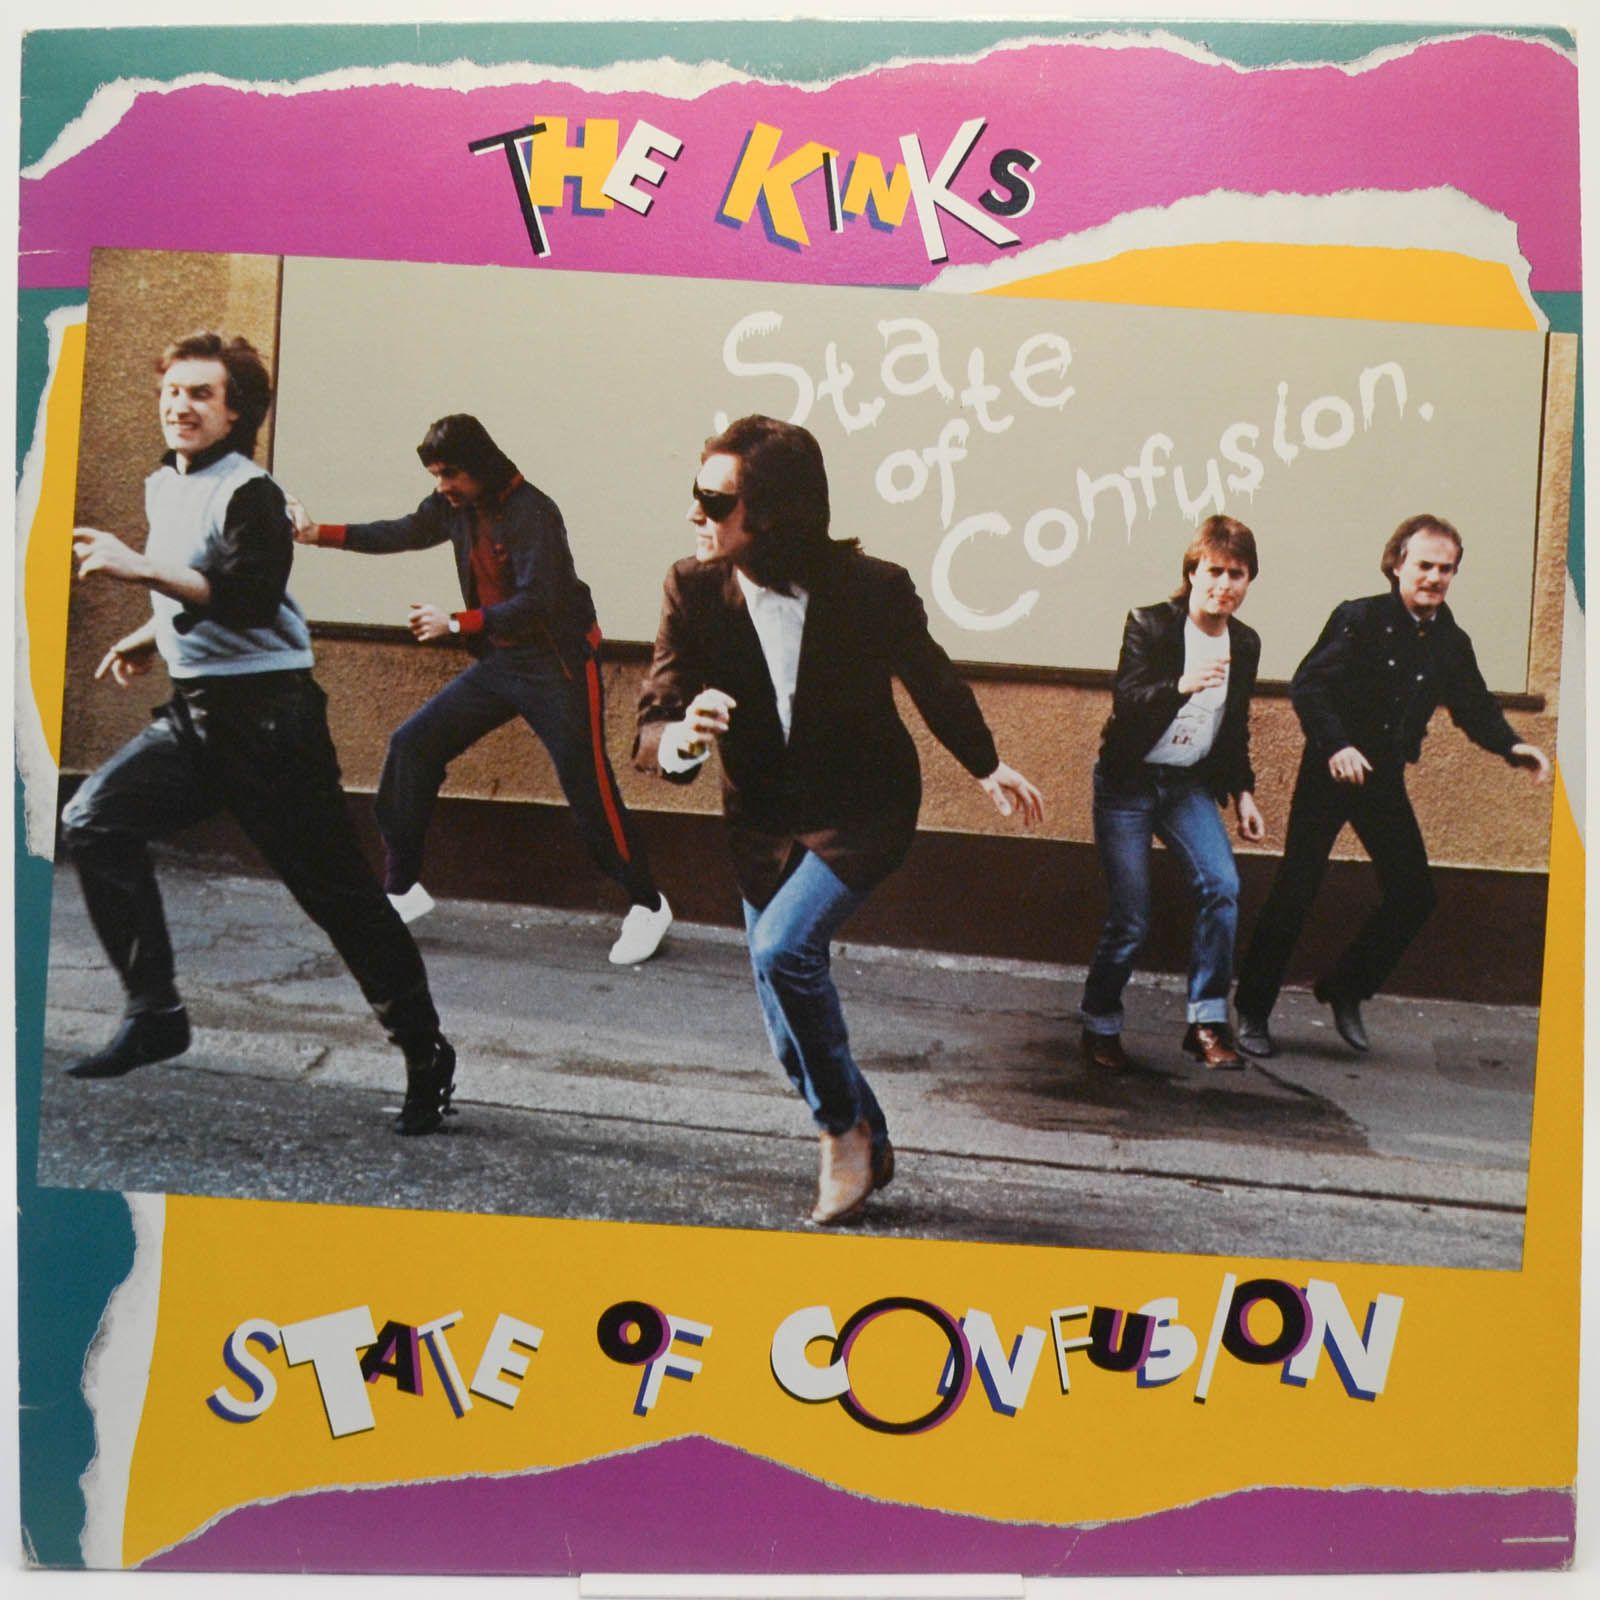 Kinks — State Of Confusion, 1983